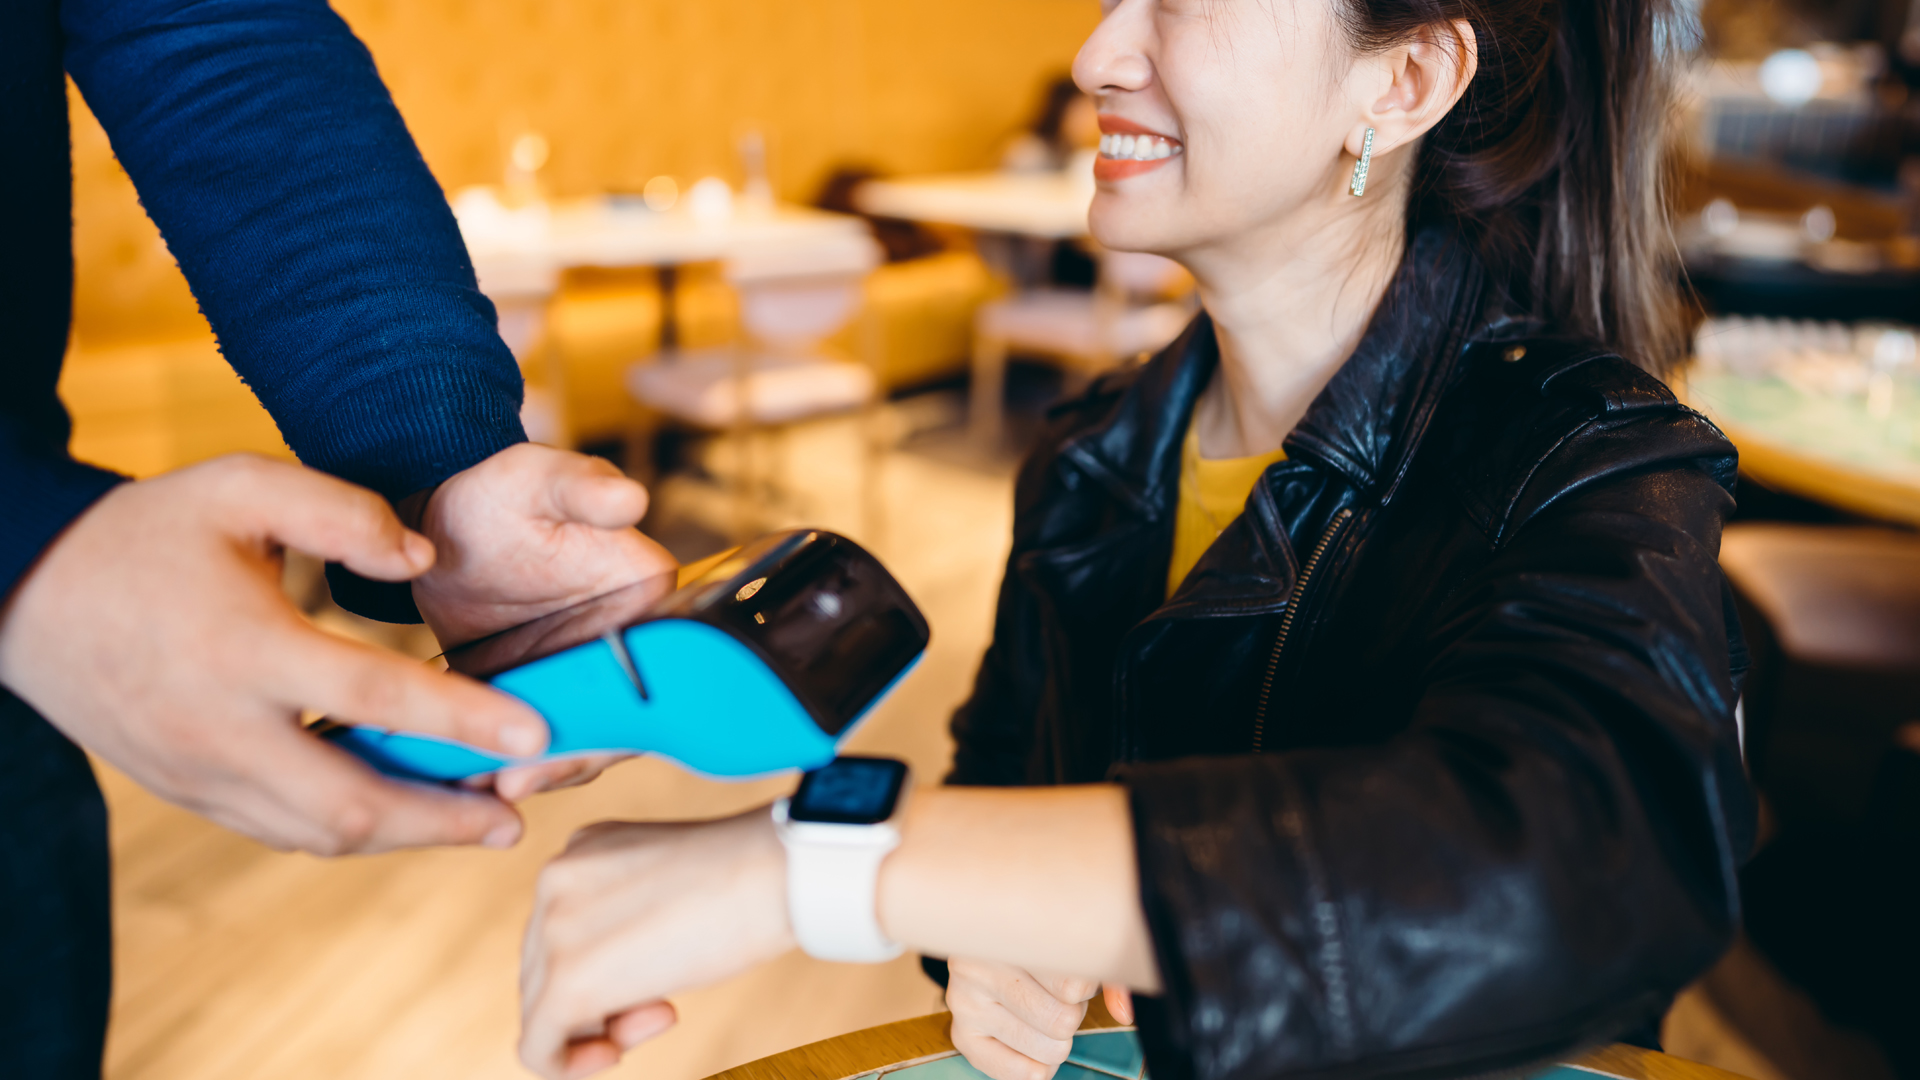 woman using an apple watch to make a payment on a pos terminal